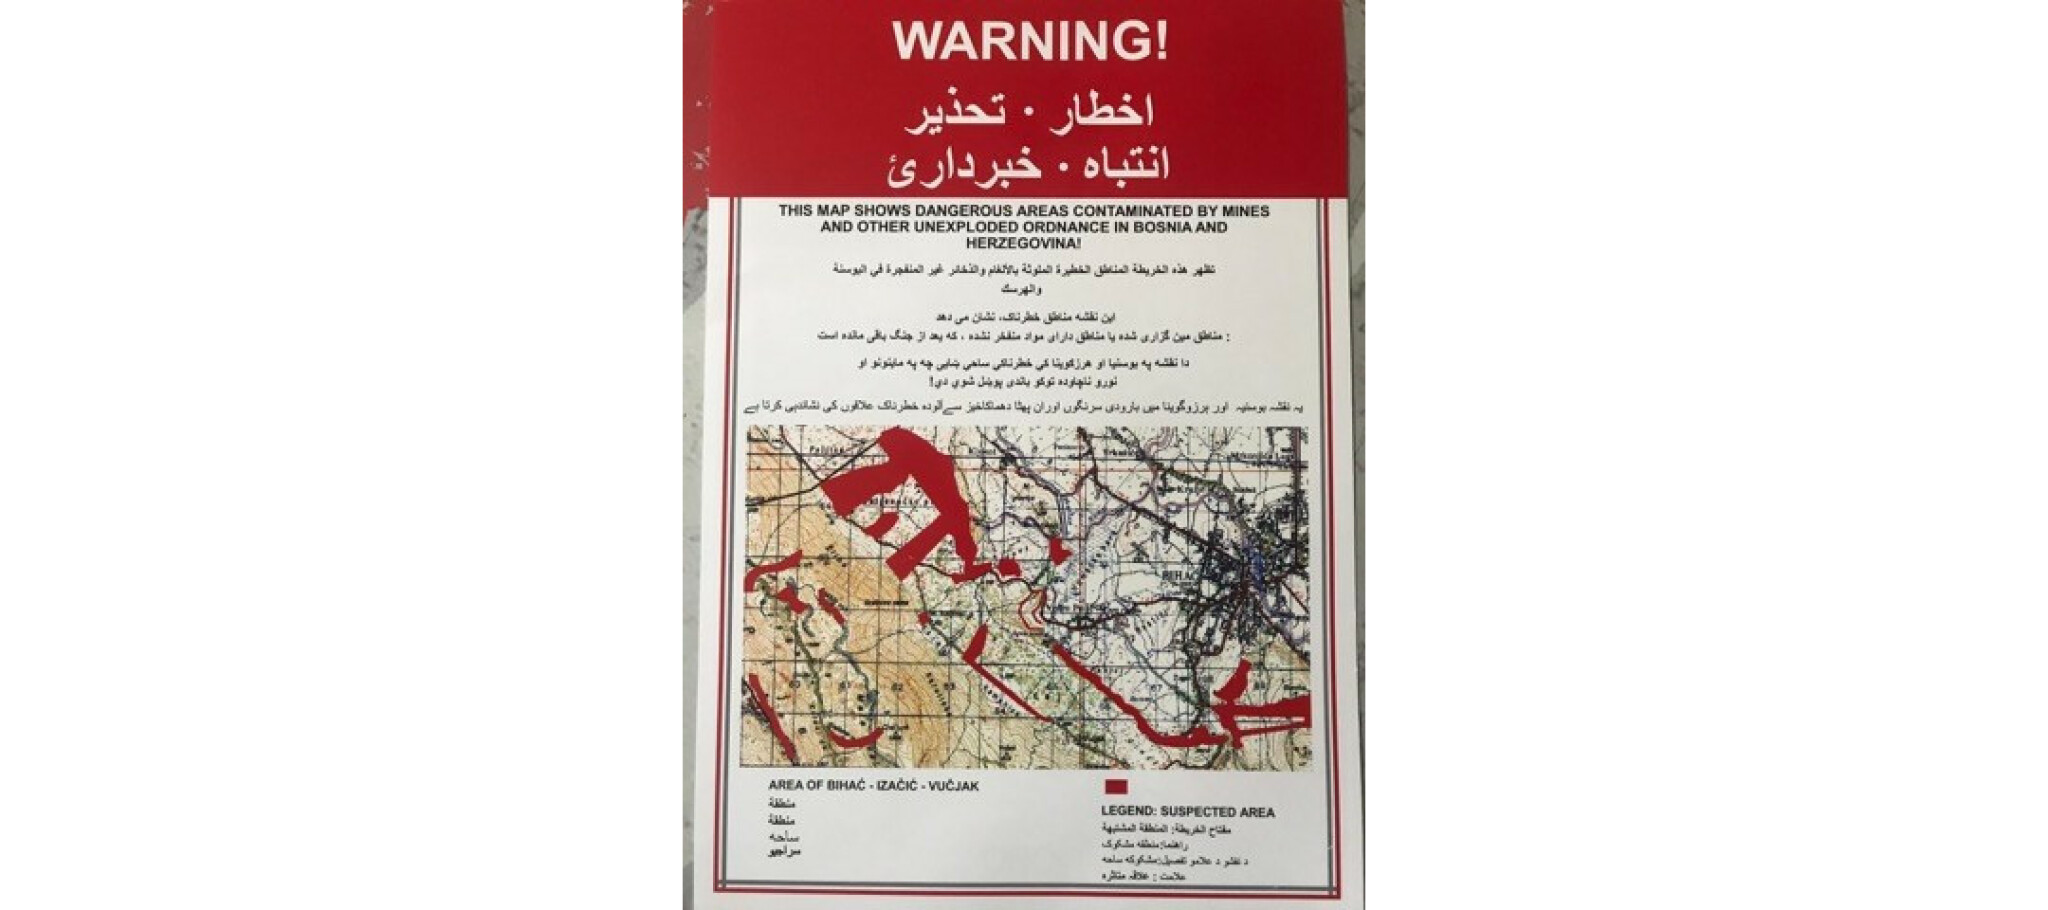 Map of the suspected landmine area distributed to the migrants in Bosnia by the Red Cross. I am grateful to David Henig for sharing this map with me.